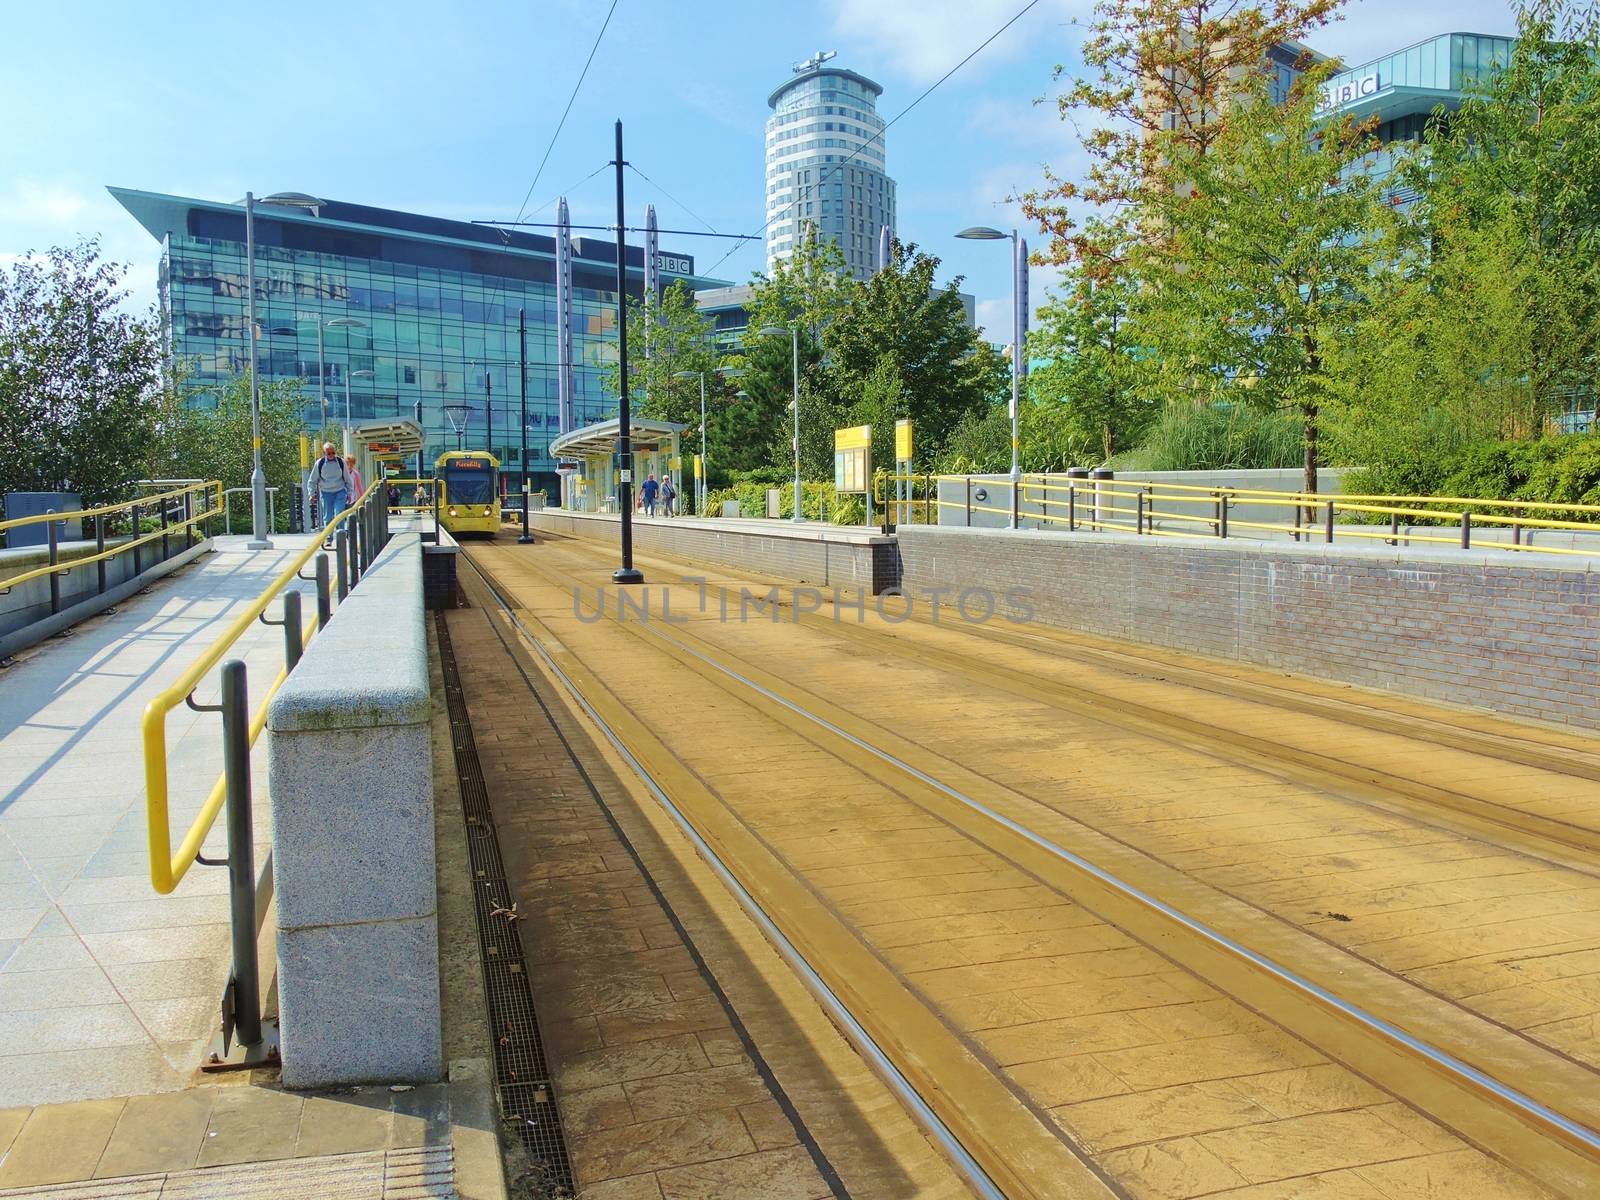 An image of the Tram station in Media city at Salford Quays, UK.